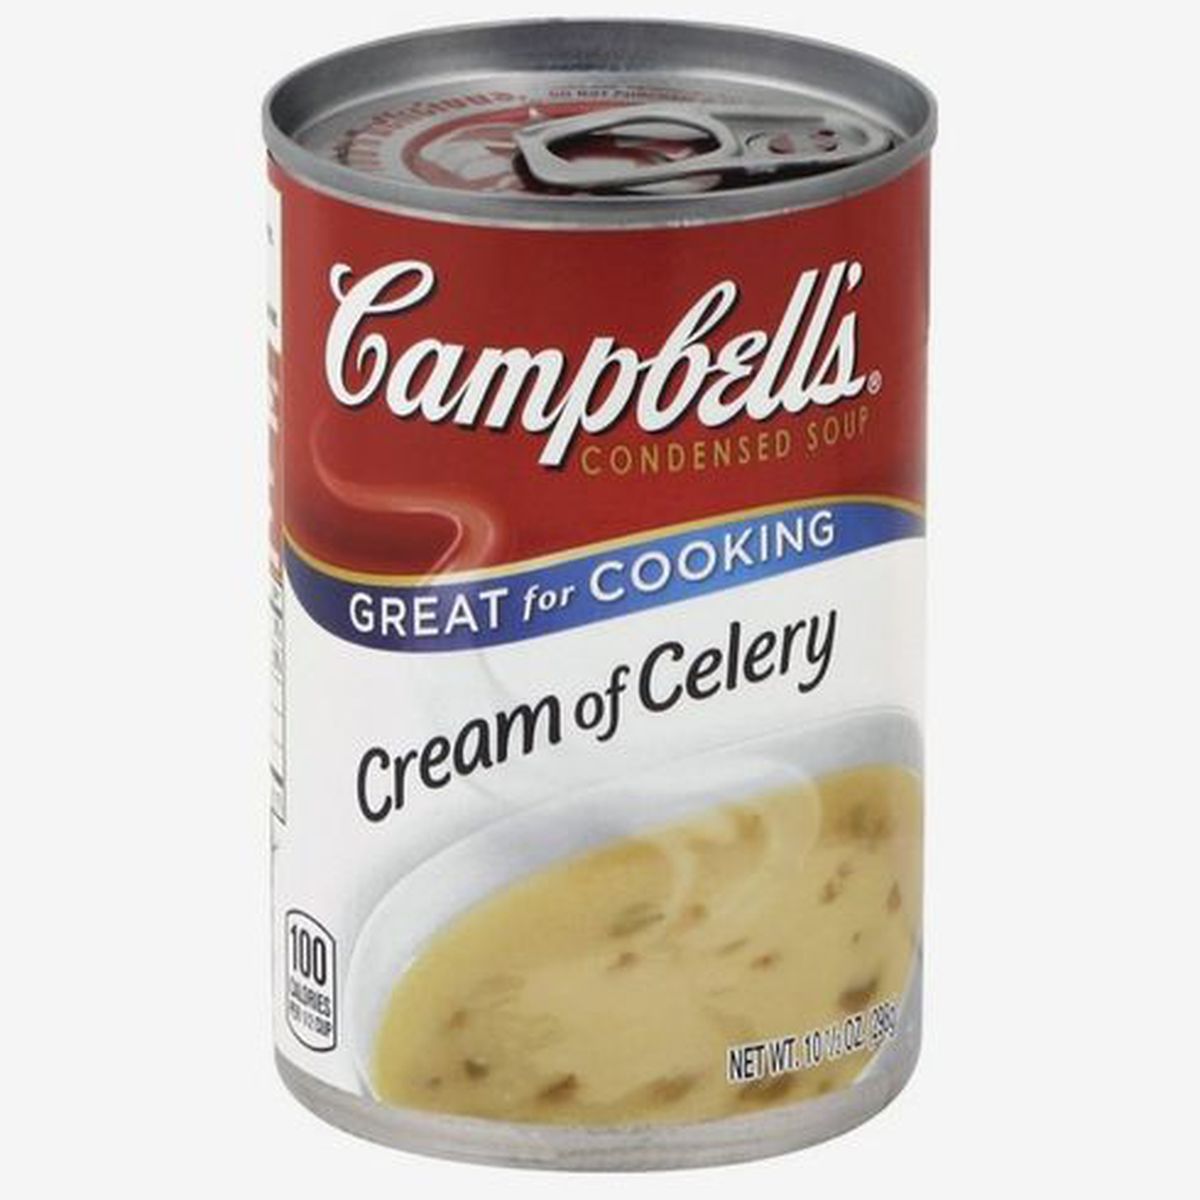 A can of Campbell’s cream of celery